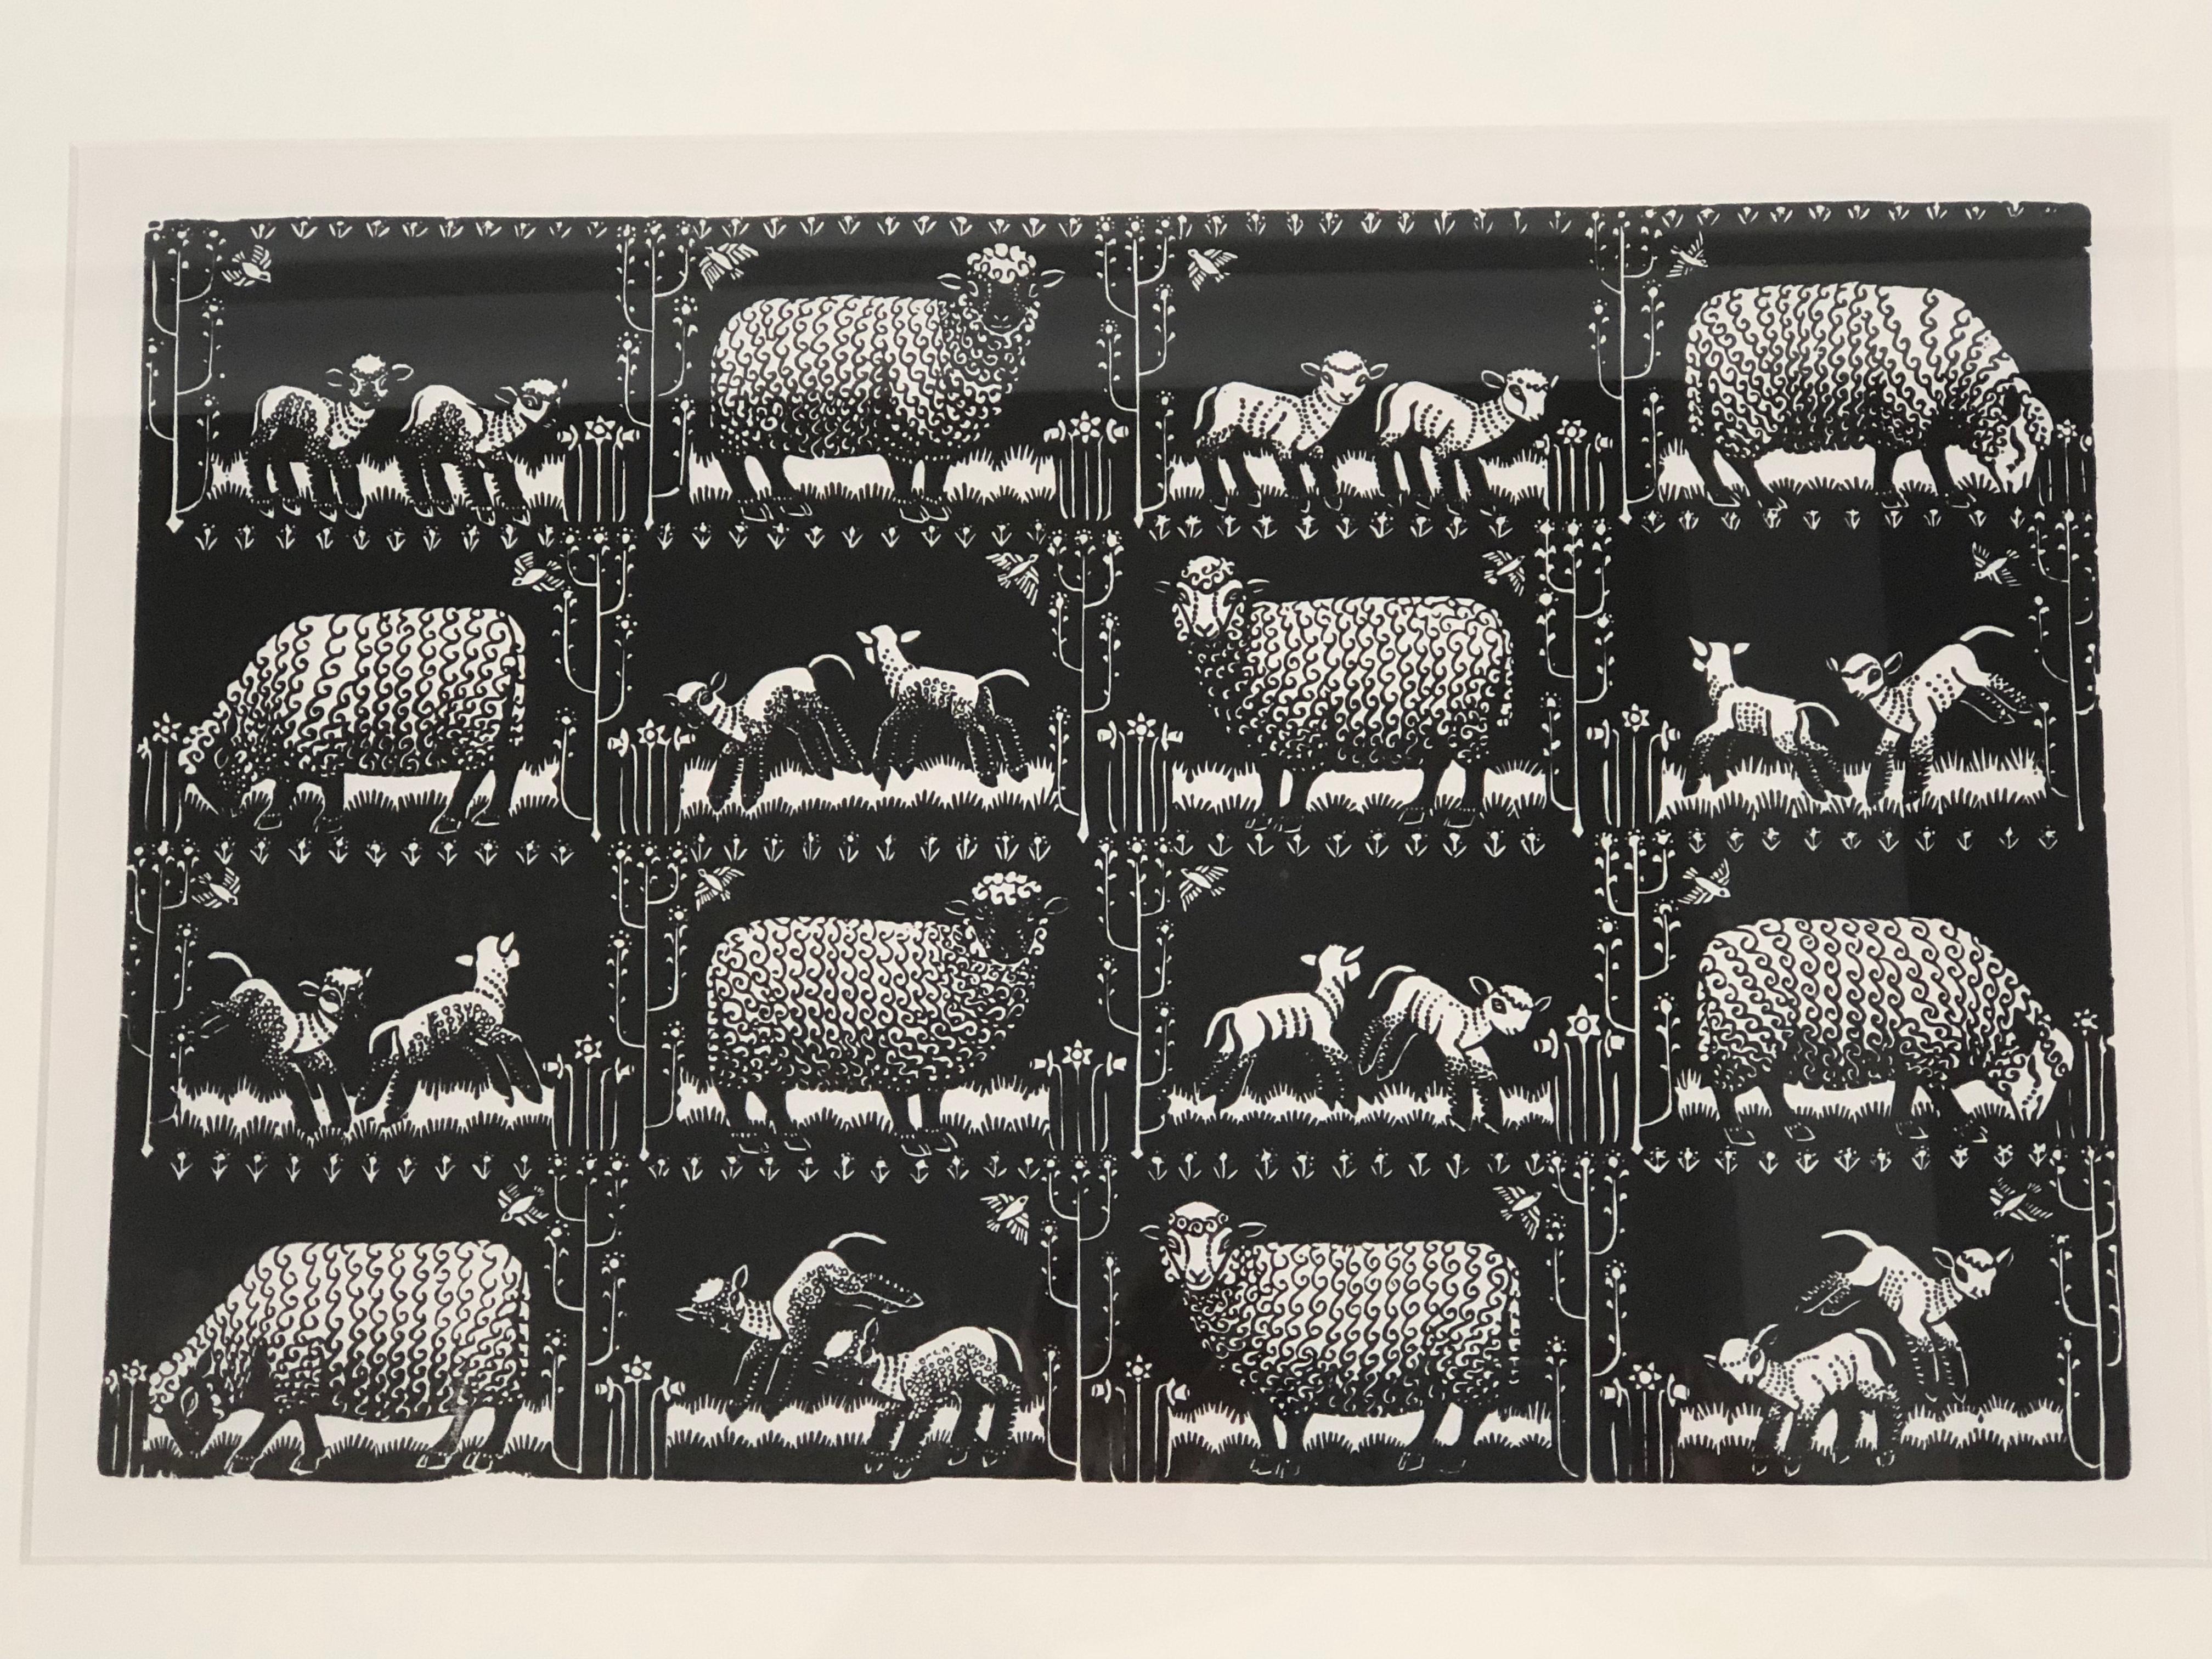 A black and white hand block print on paper of the Folly Cove Designers' Spring Lambs II pattern by Virginia Lee Burton Demetrios, circa 1951, depicting a grid of 16 vignettes of stylized sheep with their frolicking baby lambs, within stylized